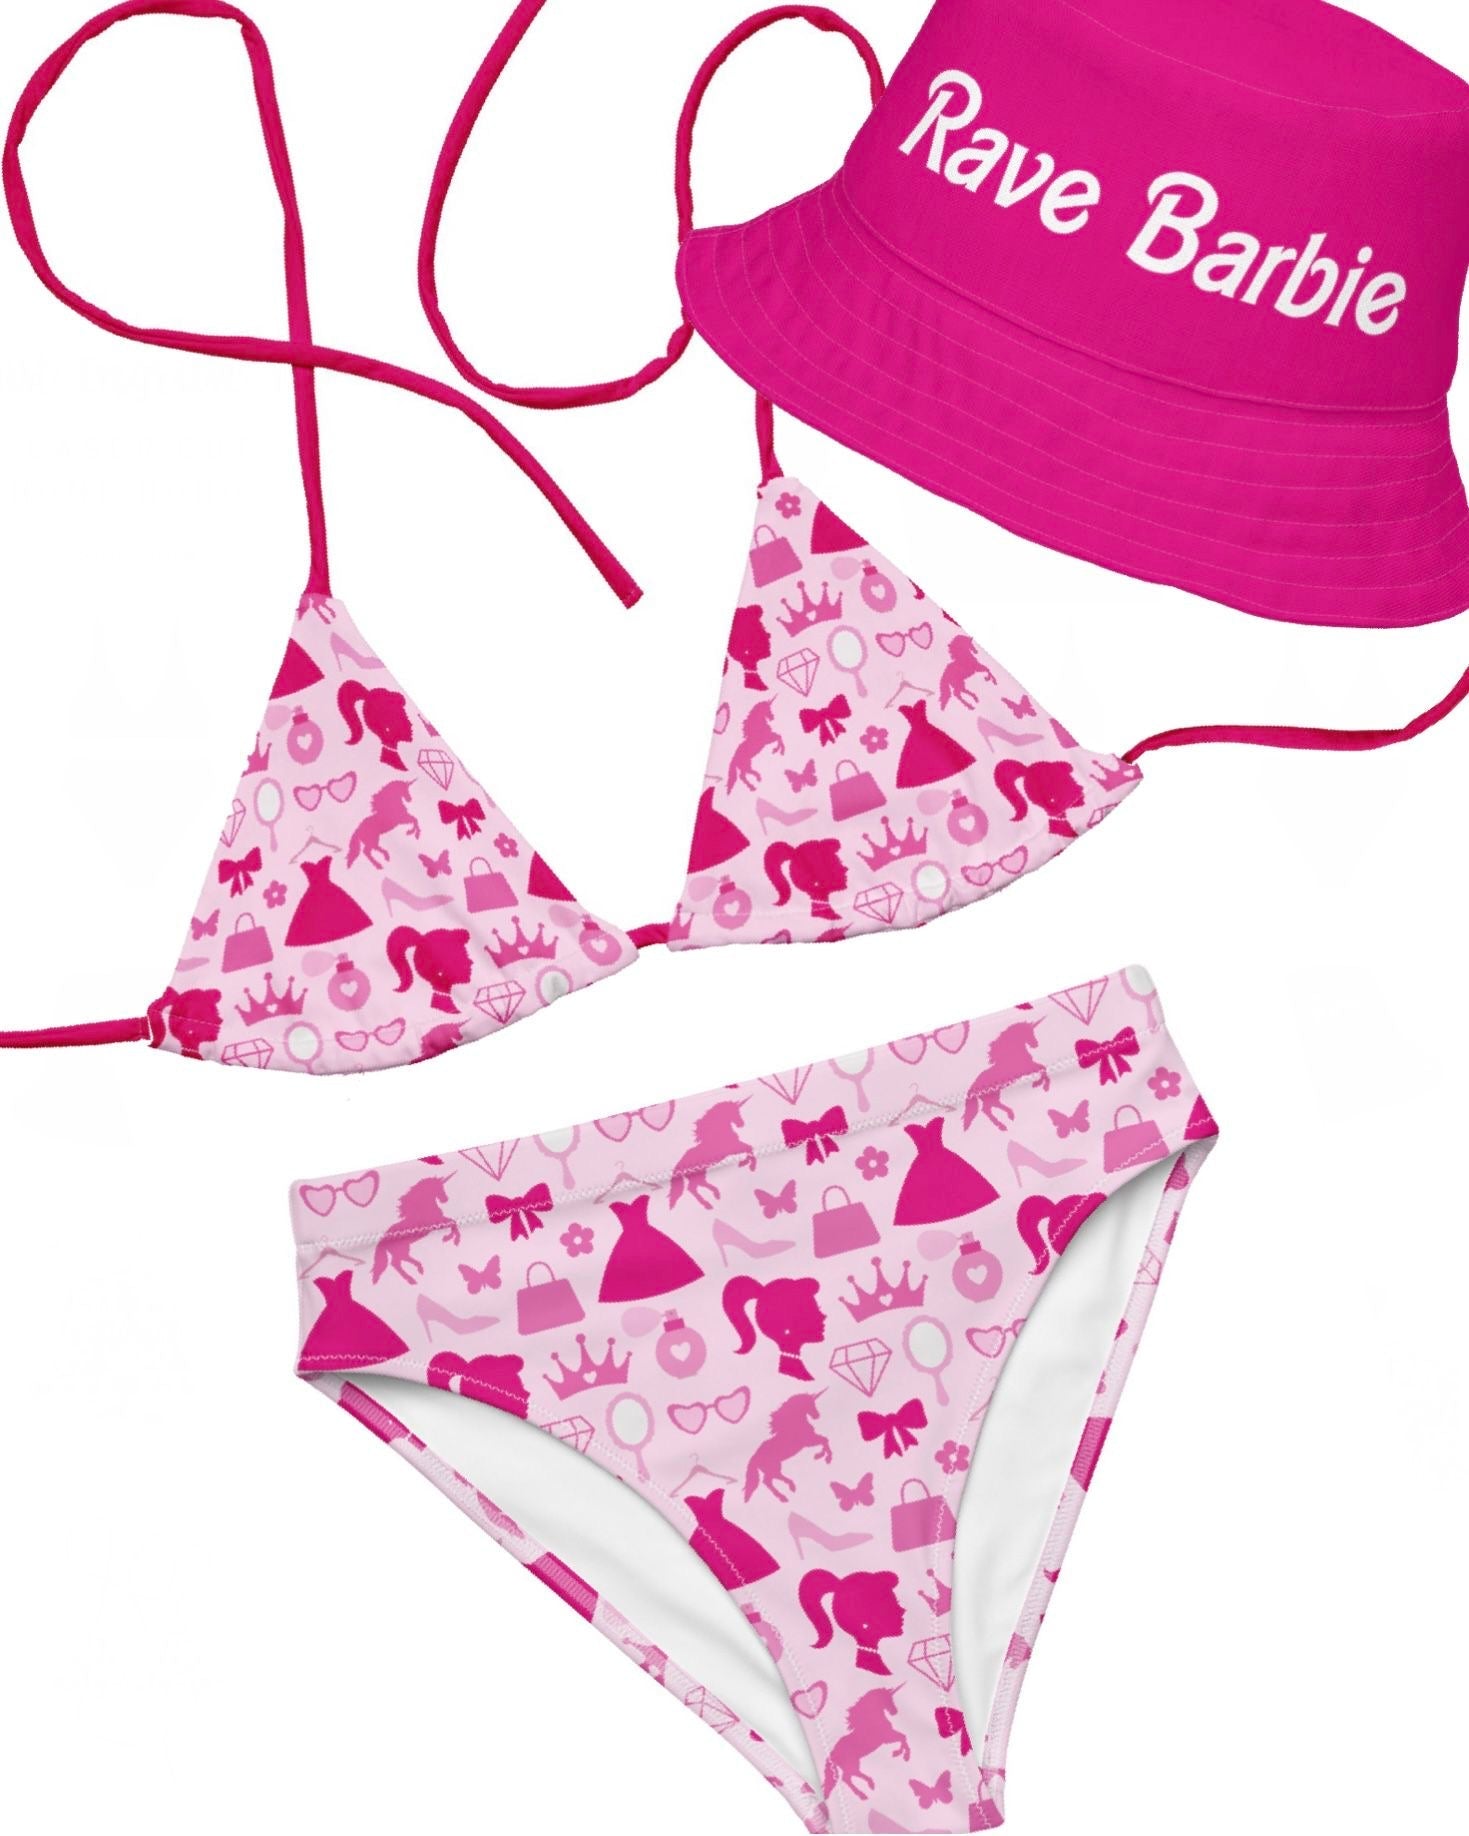 Rave Barbie Reversible Bucket Hat with the Let's Go Party String Bikini Top and High Waisted Bottoms